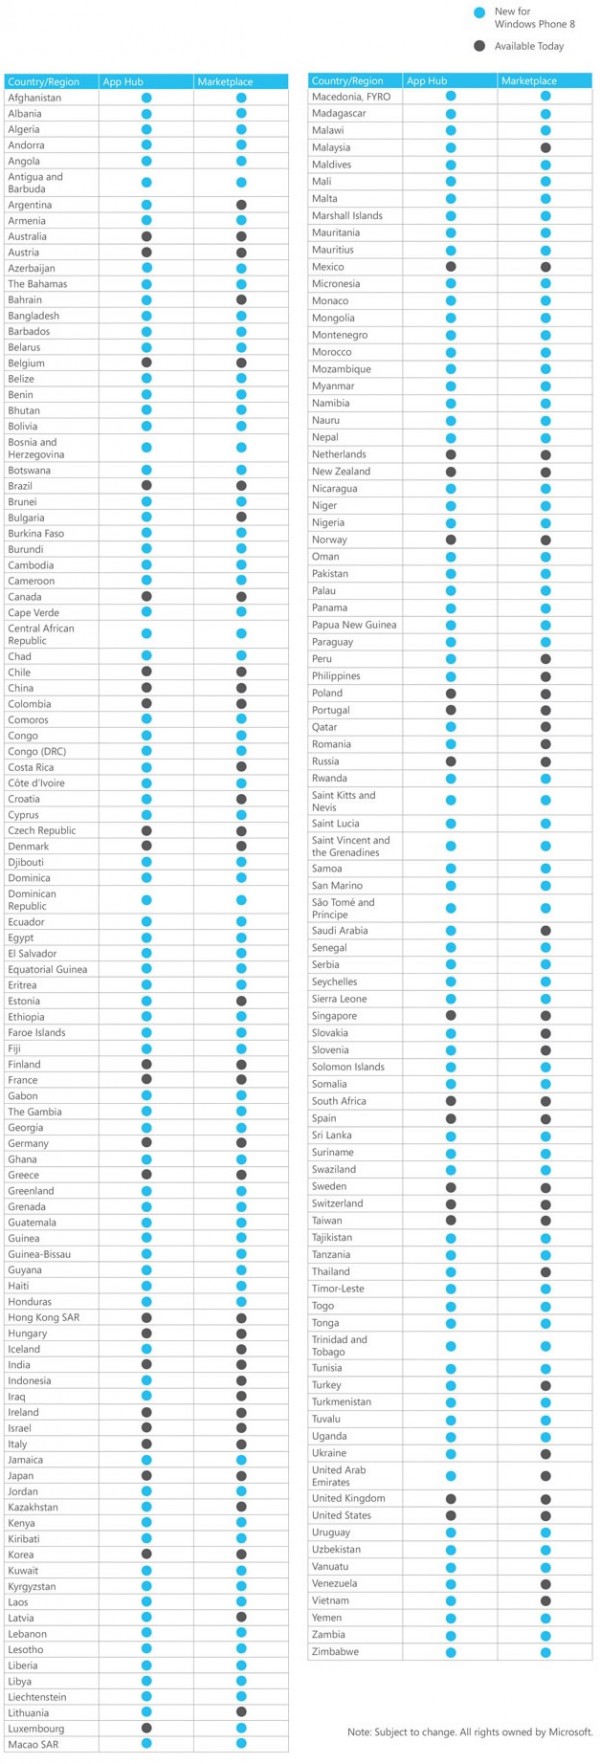 List of Countries Windows Phone 8 is launching